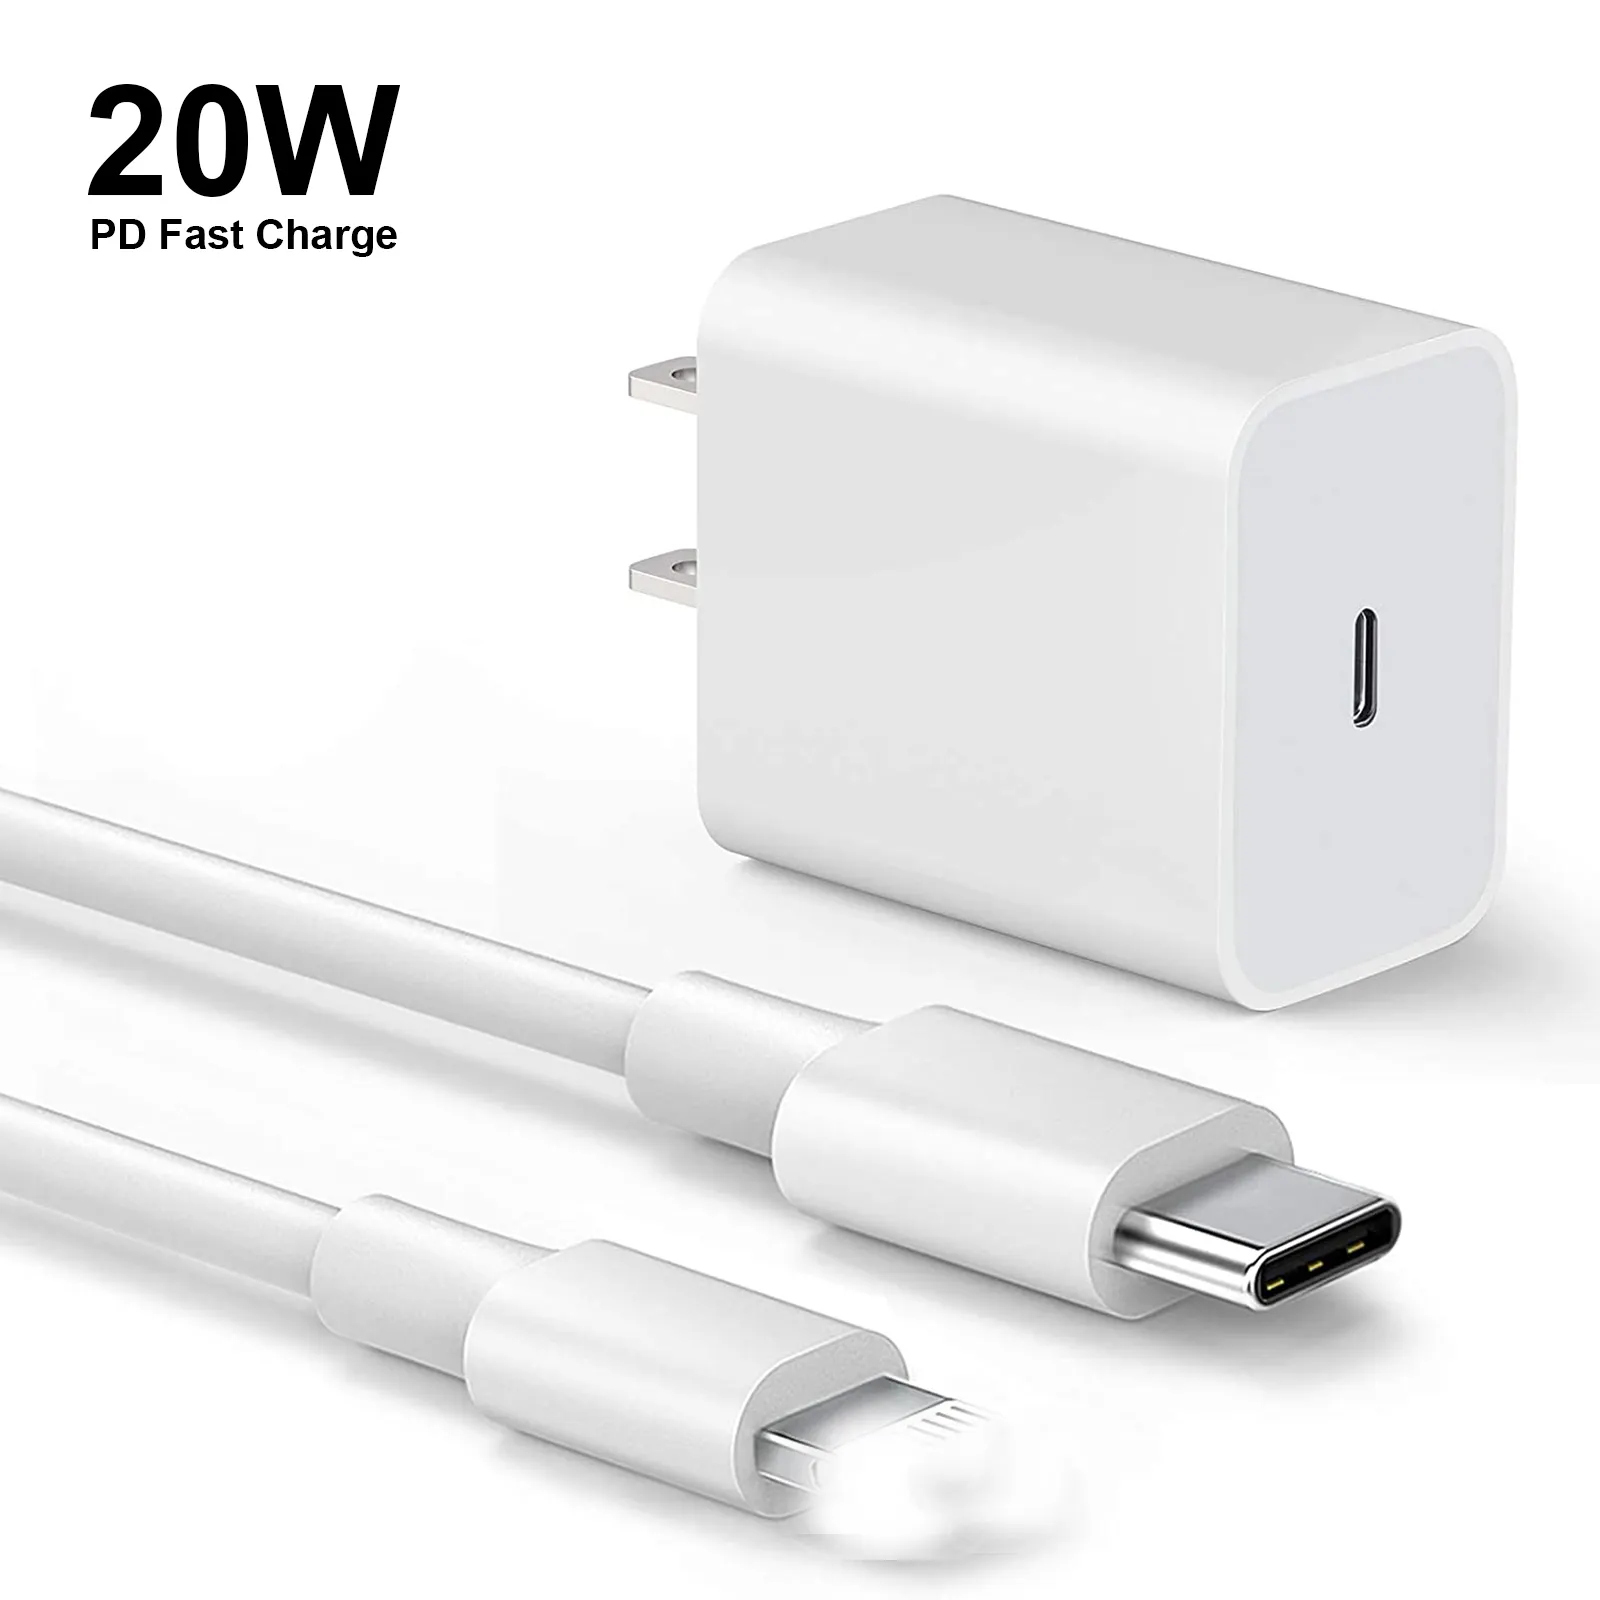 Trending 2021 Pd 20W Snel Opladen USB-C Usb Type C Muur Draagbare Oplader Voor Iphone 13 Oplader Voor Iphone charger Adapter